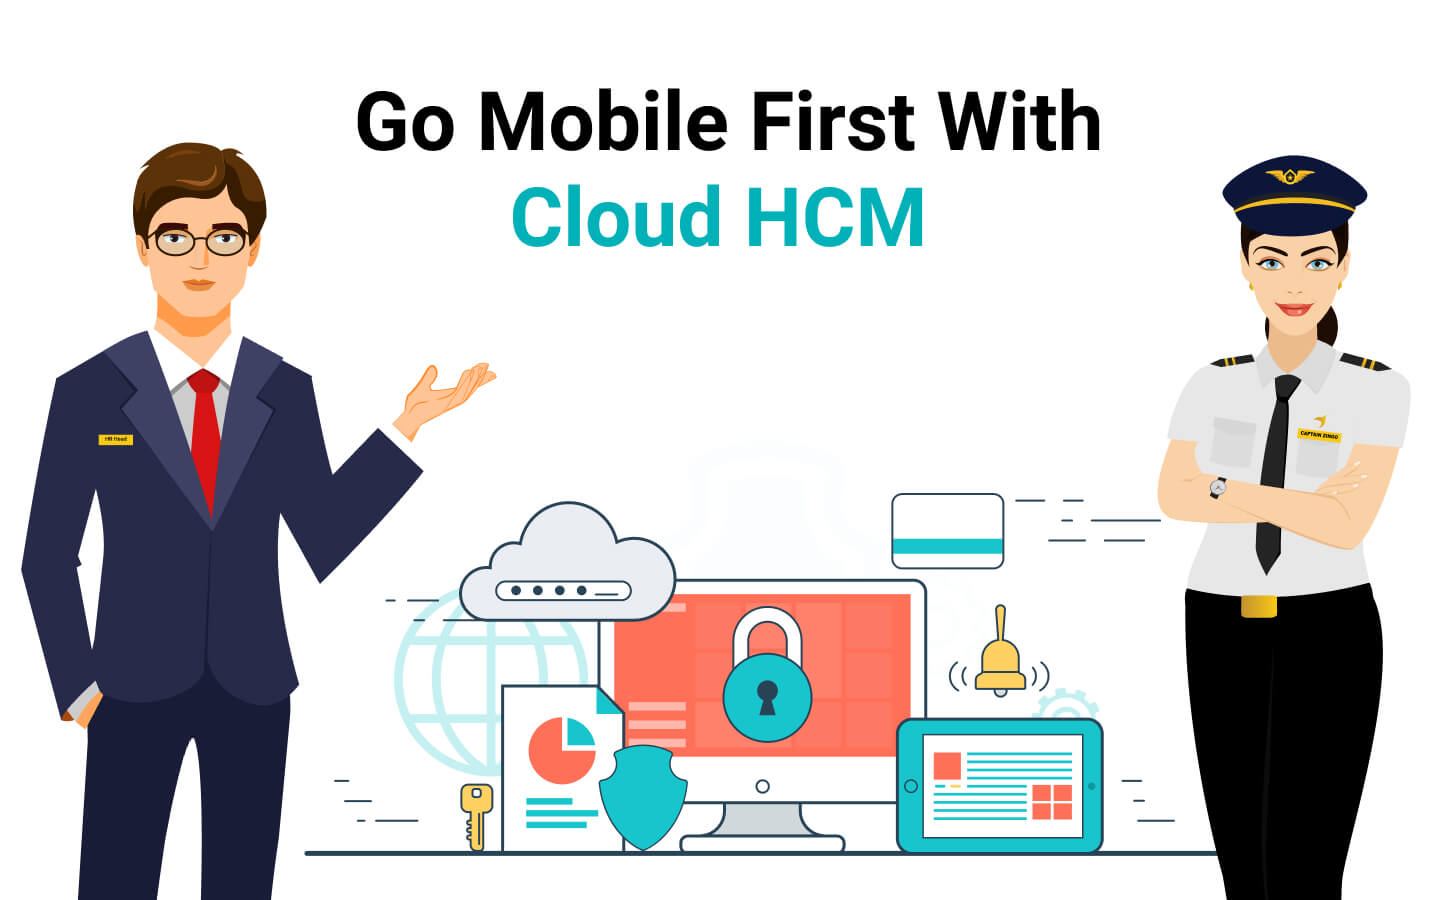 Go Mobile First With Cloud HCM